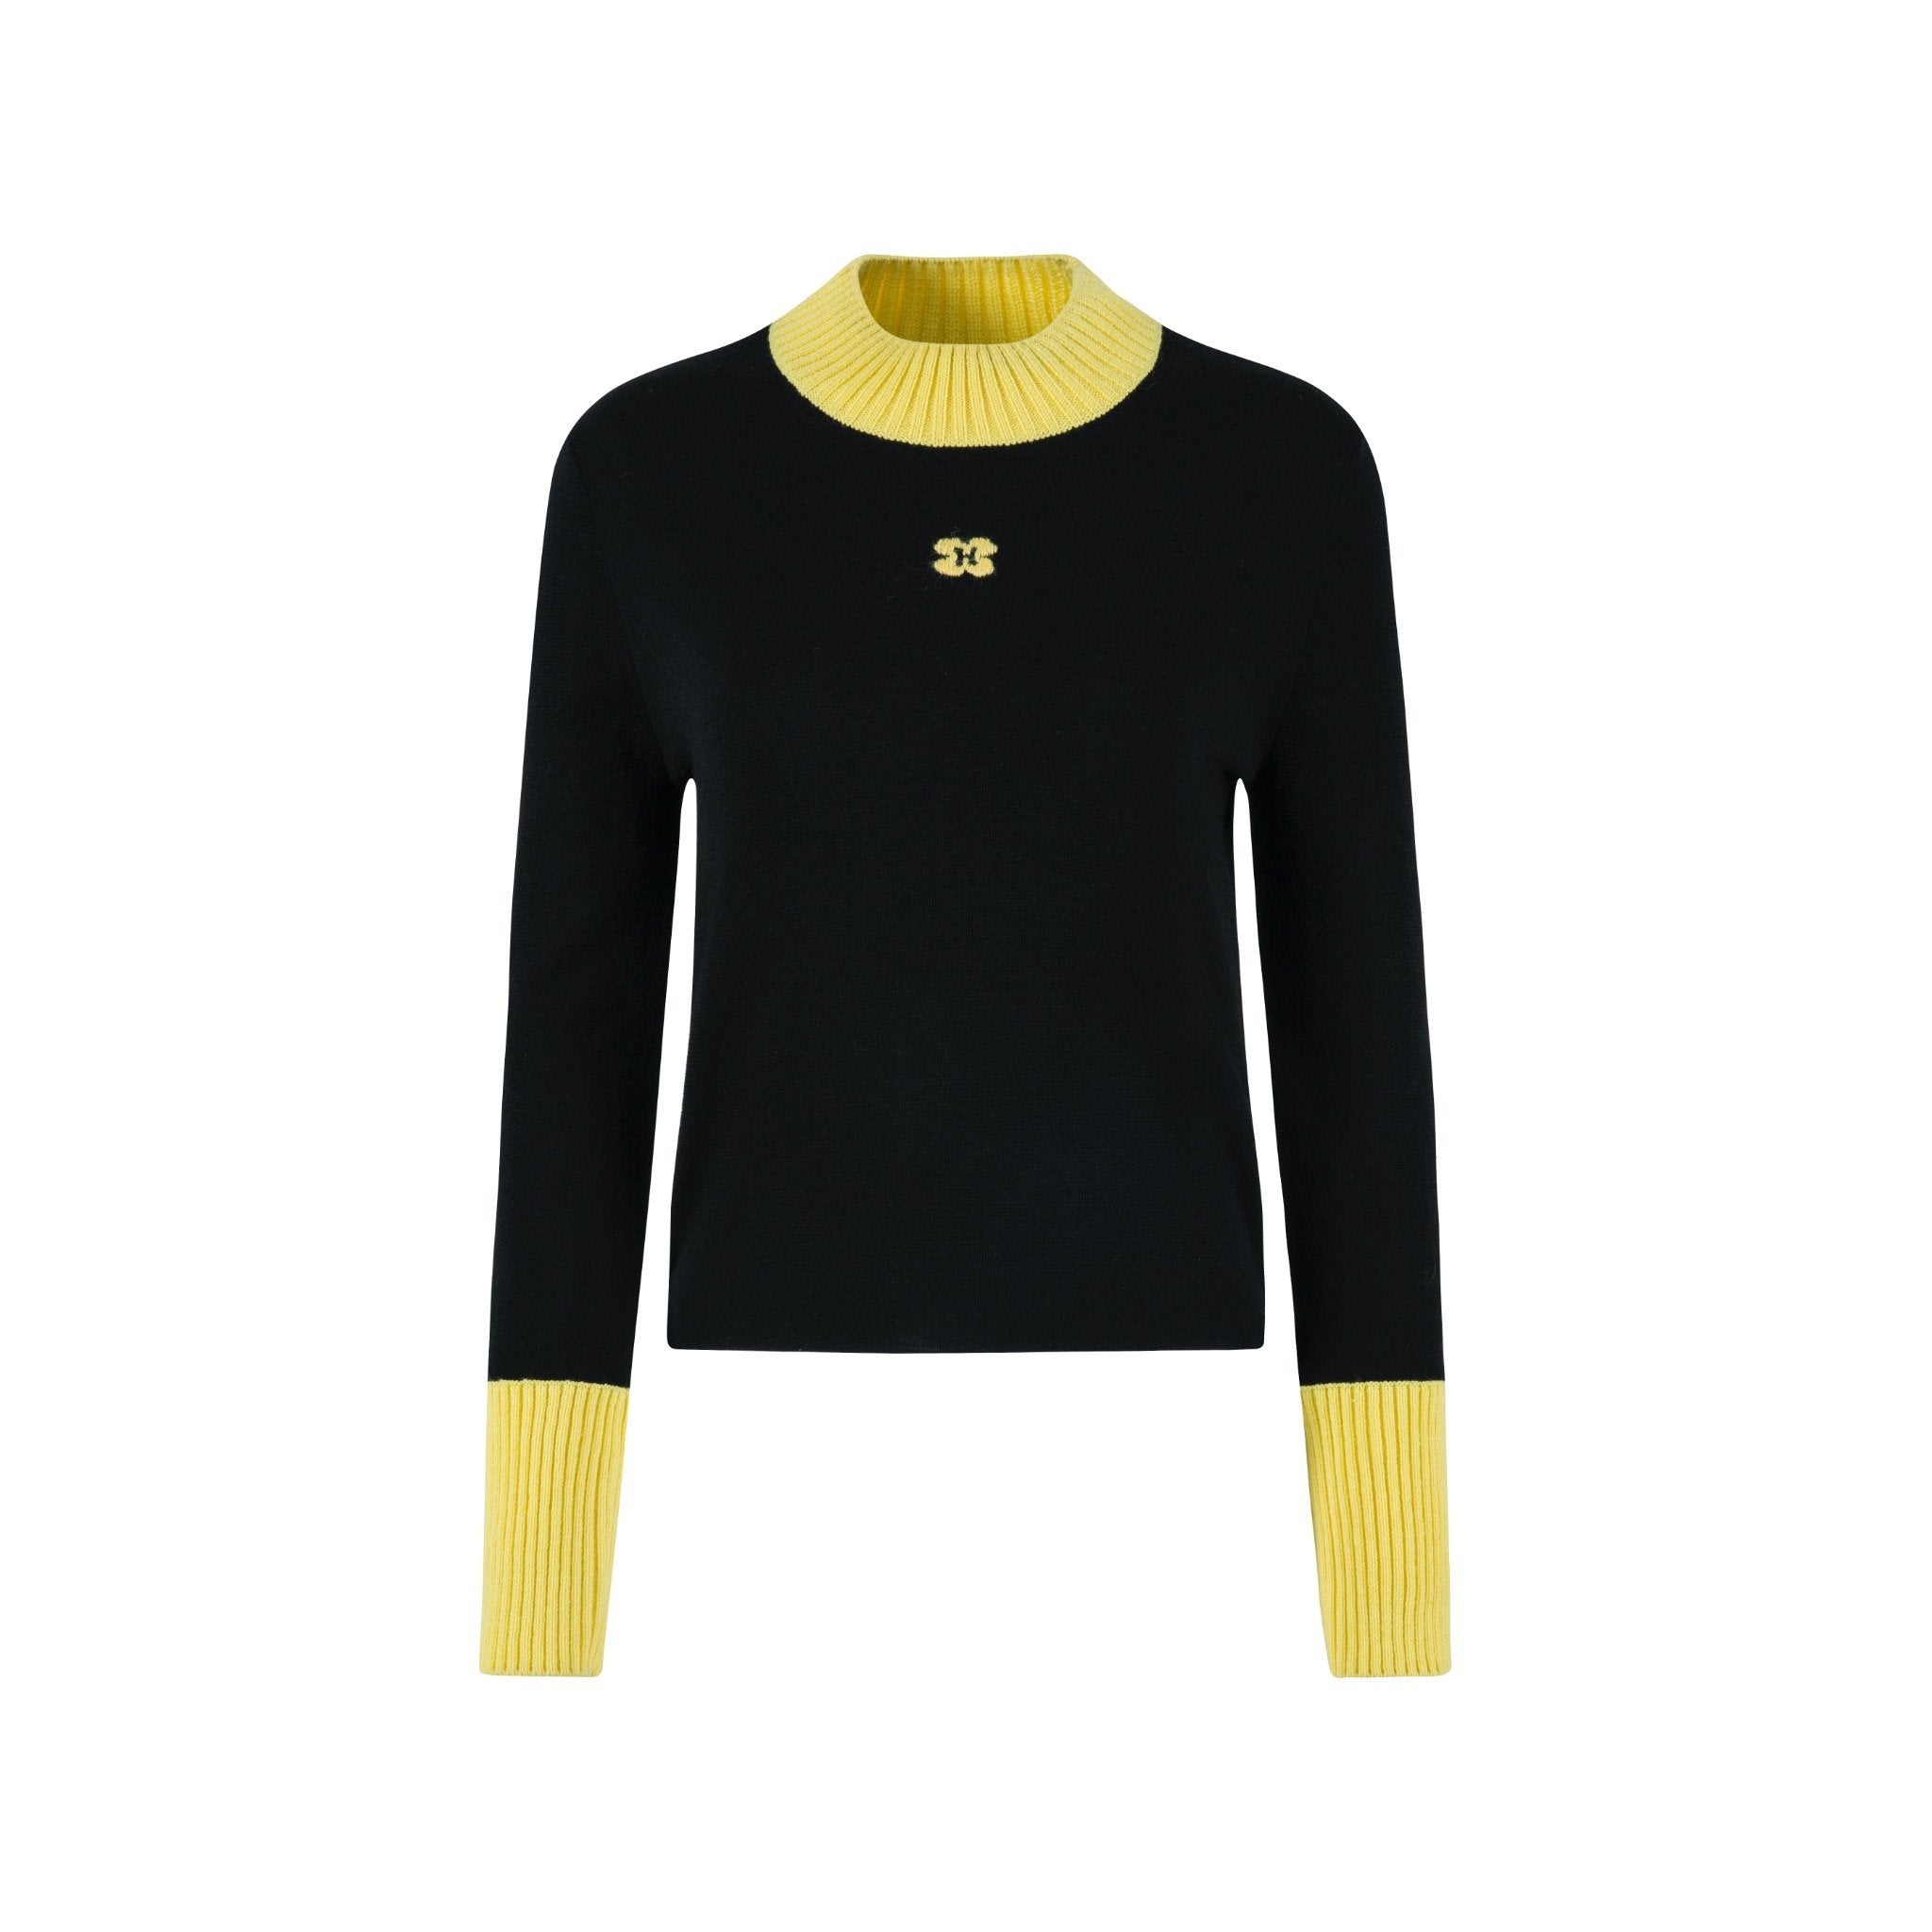 HERLIAN Black and Yellow Knitted Top | MADA IN CHINA